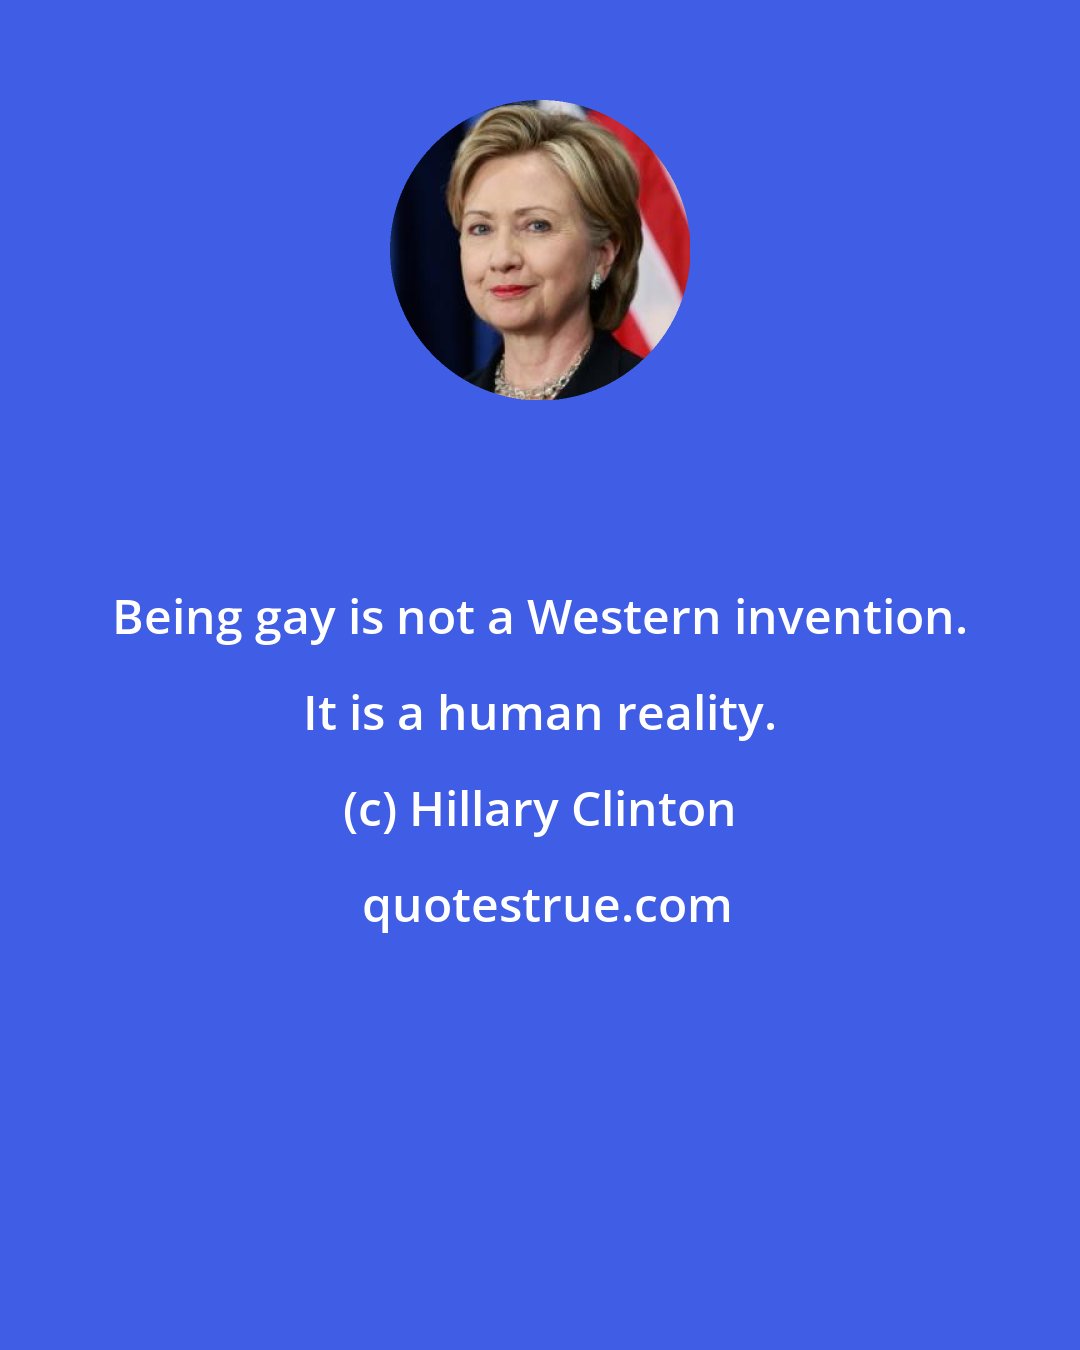 Hillary Clinton: Being gay is not a Western invention. It is a human reality.